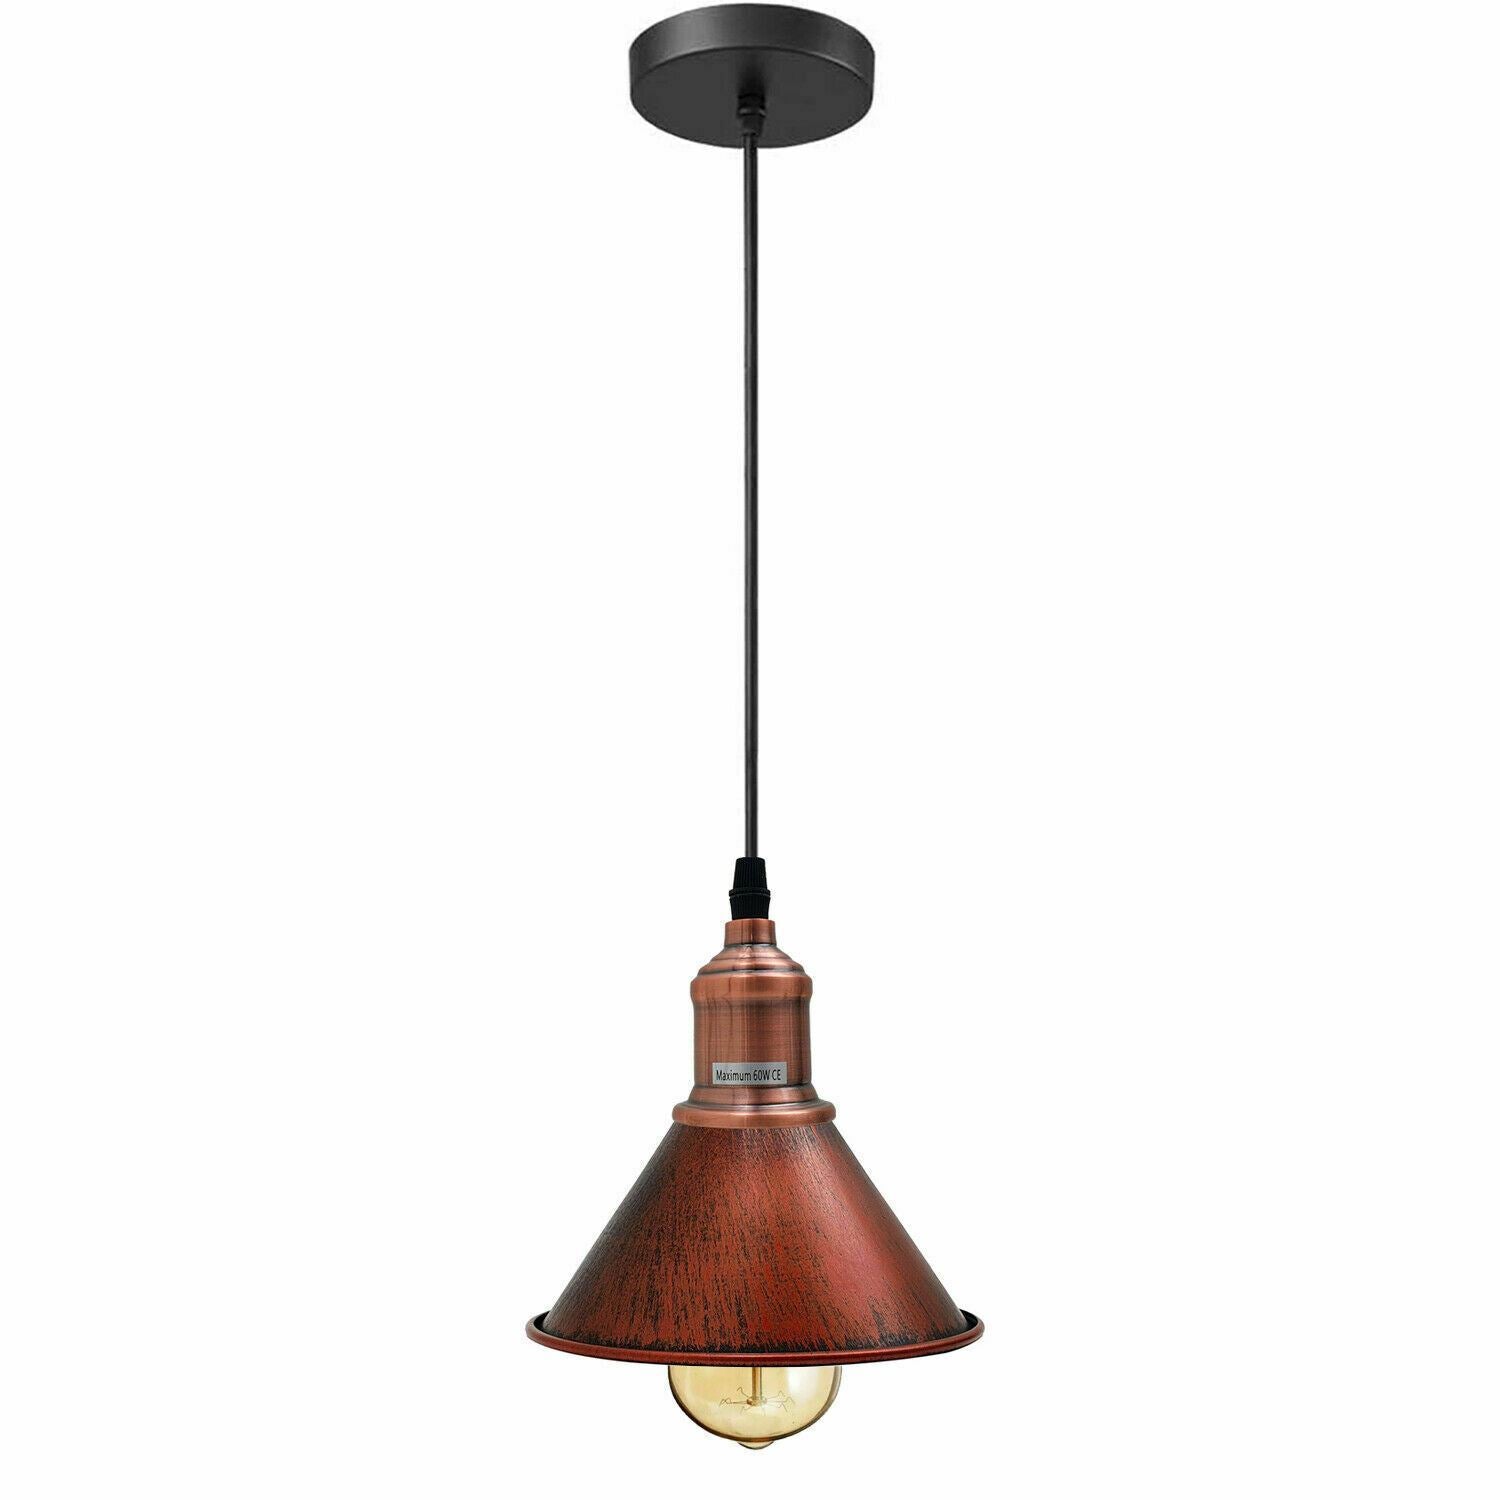 Vintage Cone Shade Rustic Ceiling Hanging Pendant Light